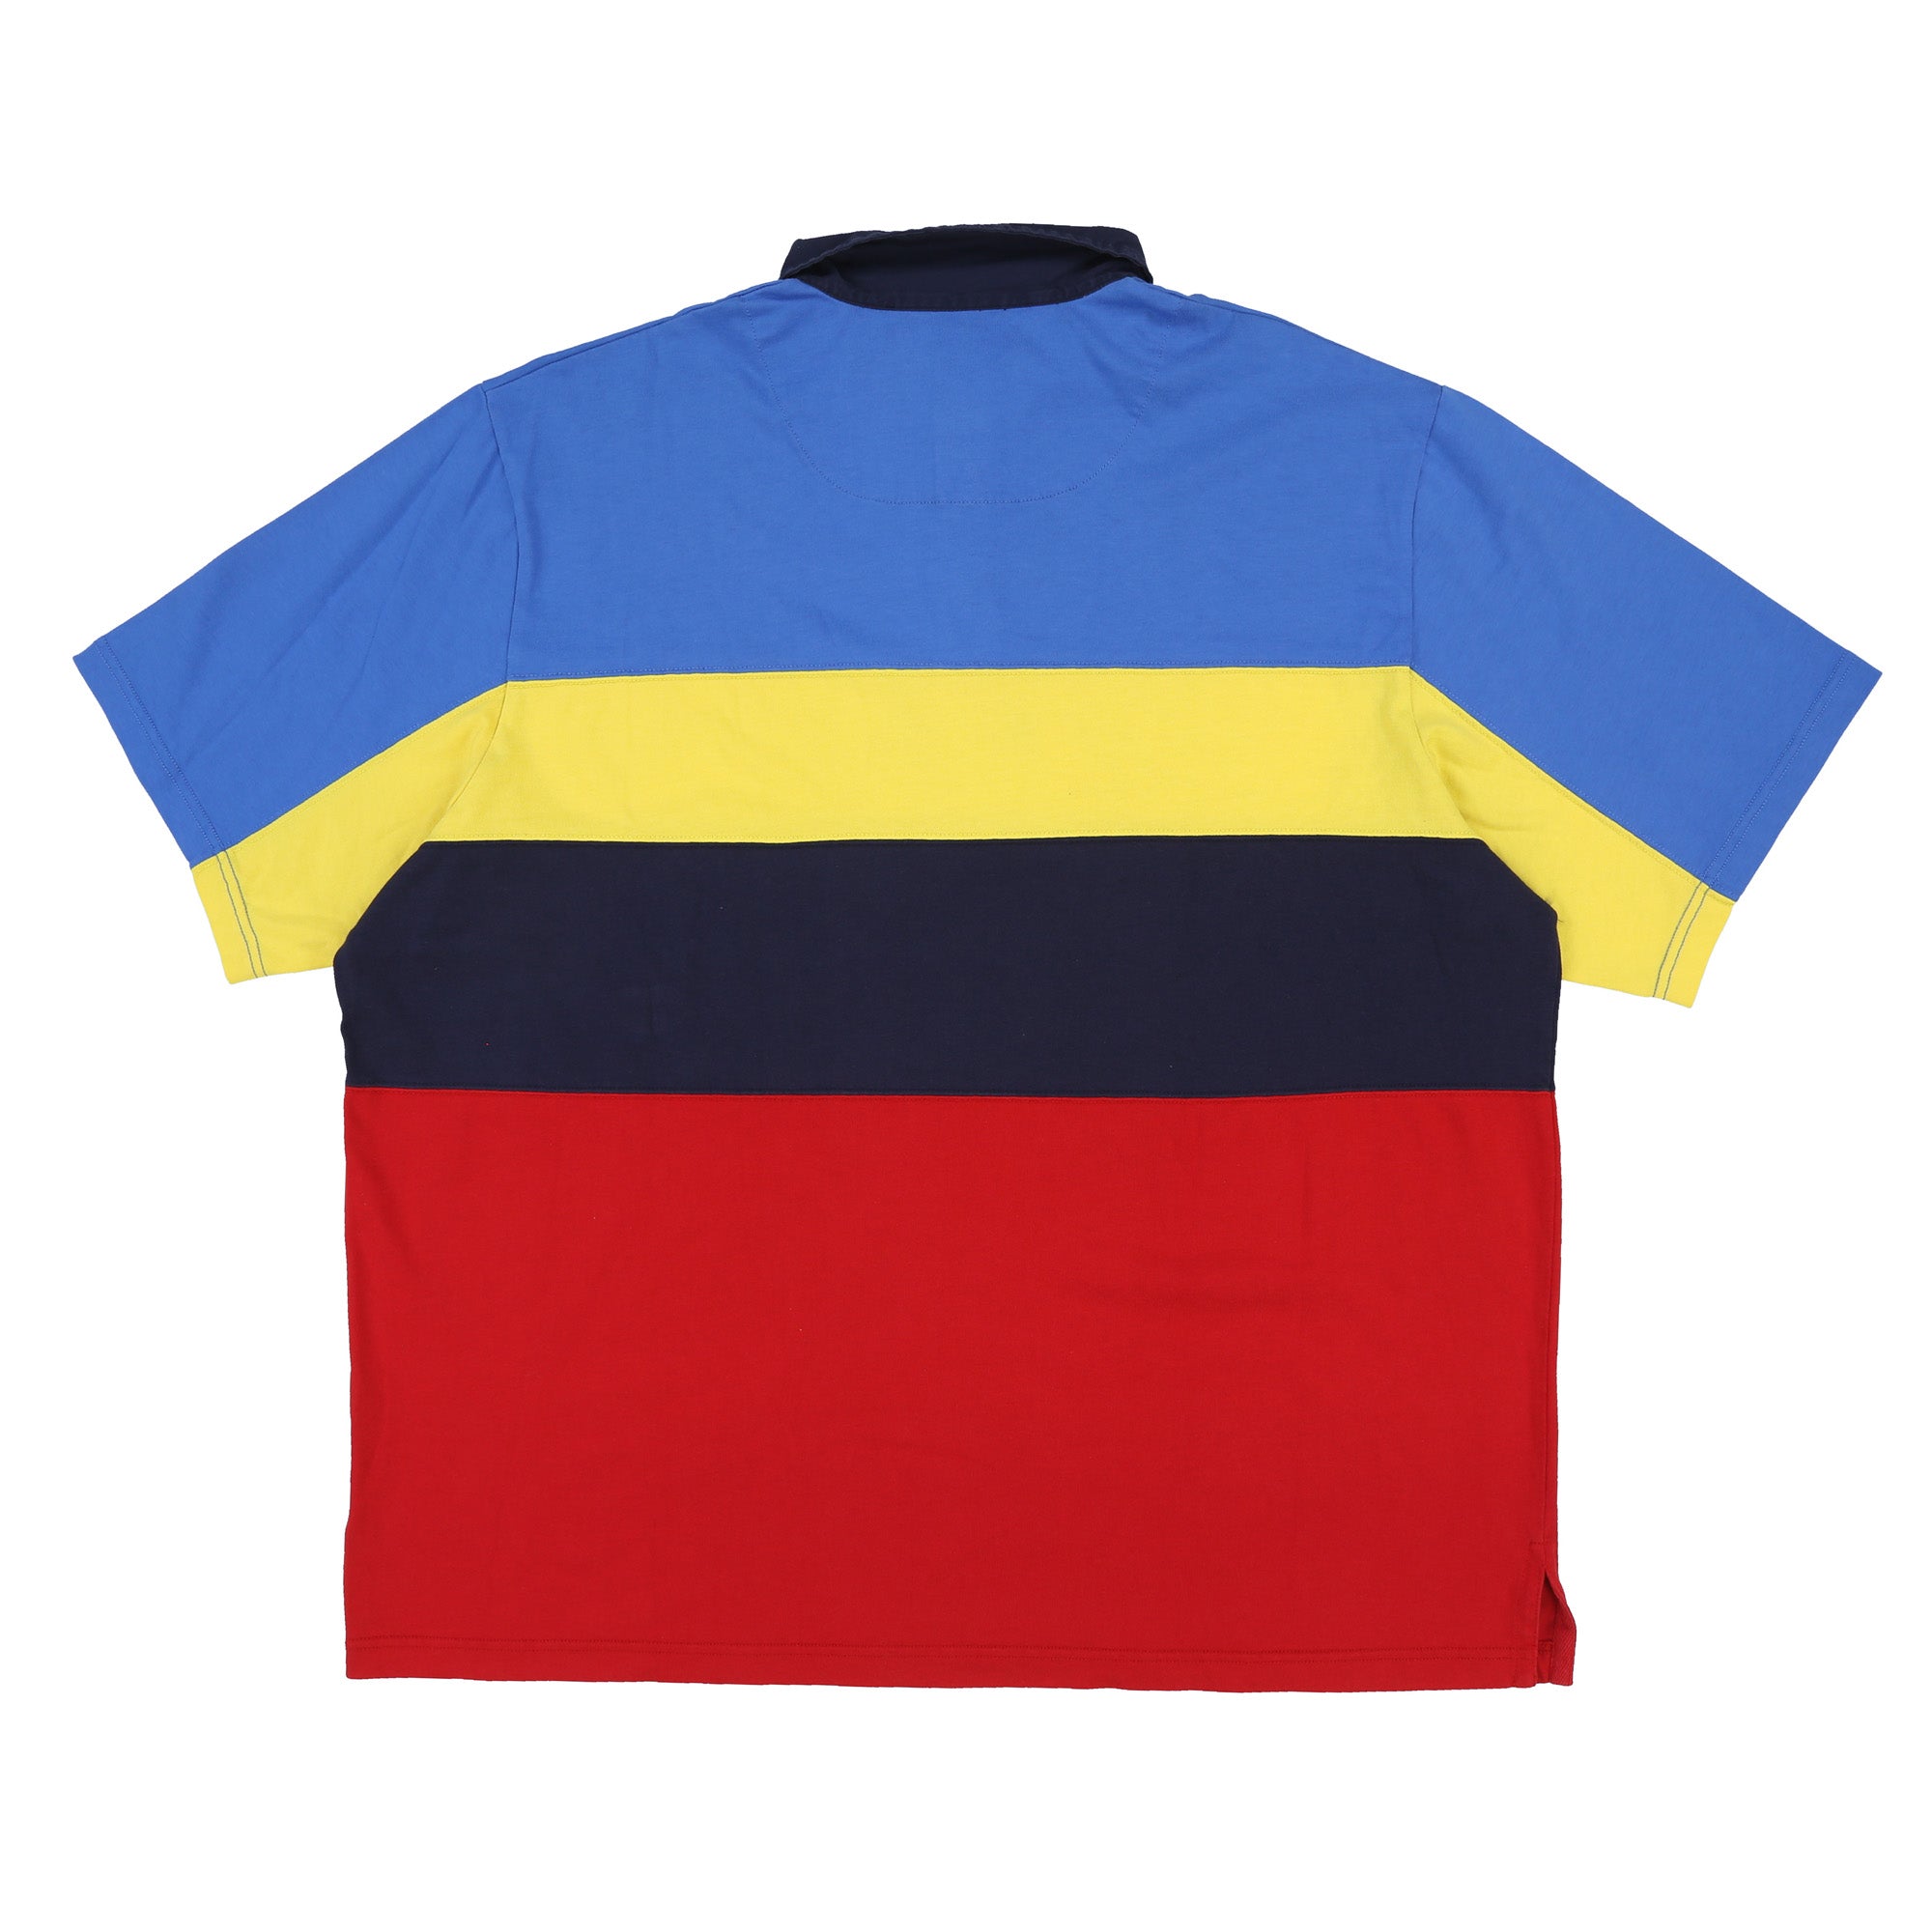 POLO SPORT SPELL OUT BLOCK COLOR POLO // BLUE YELLOW NAVY RED